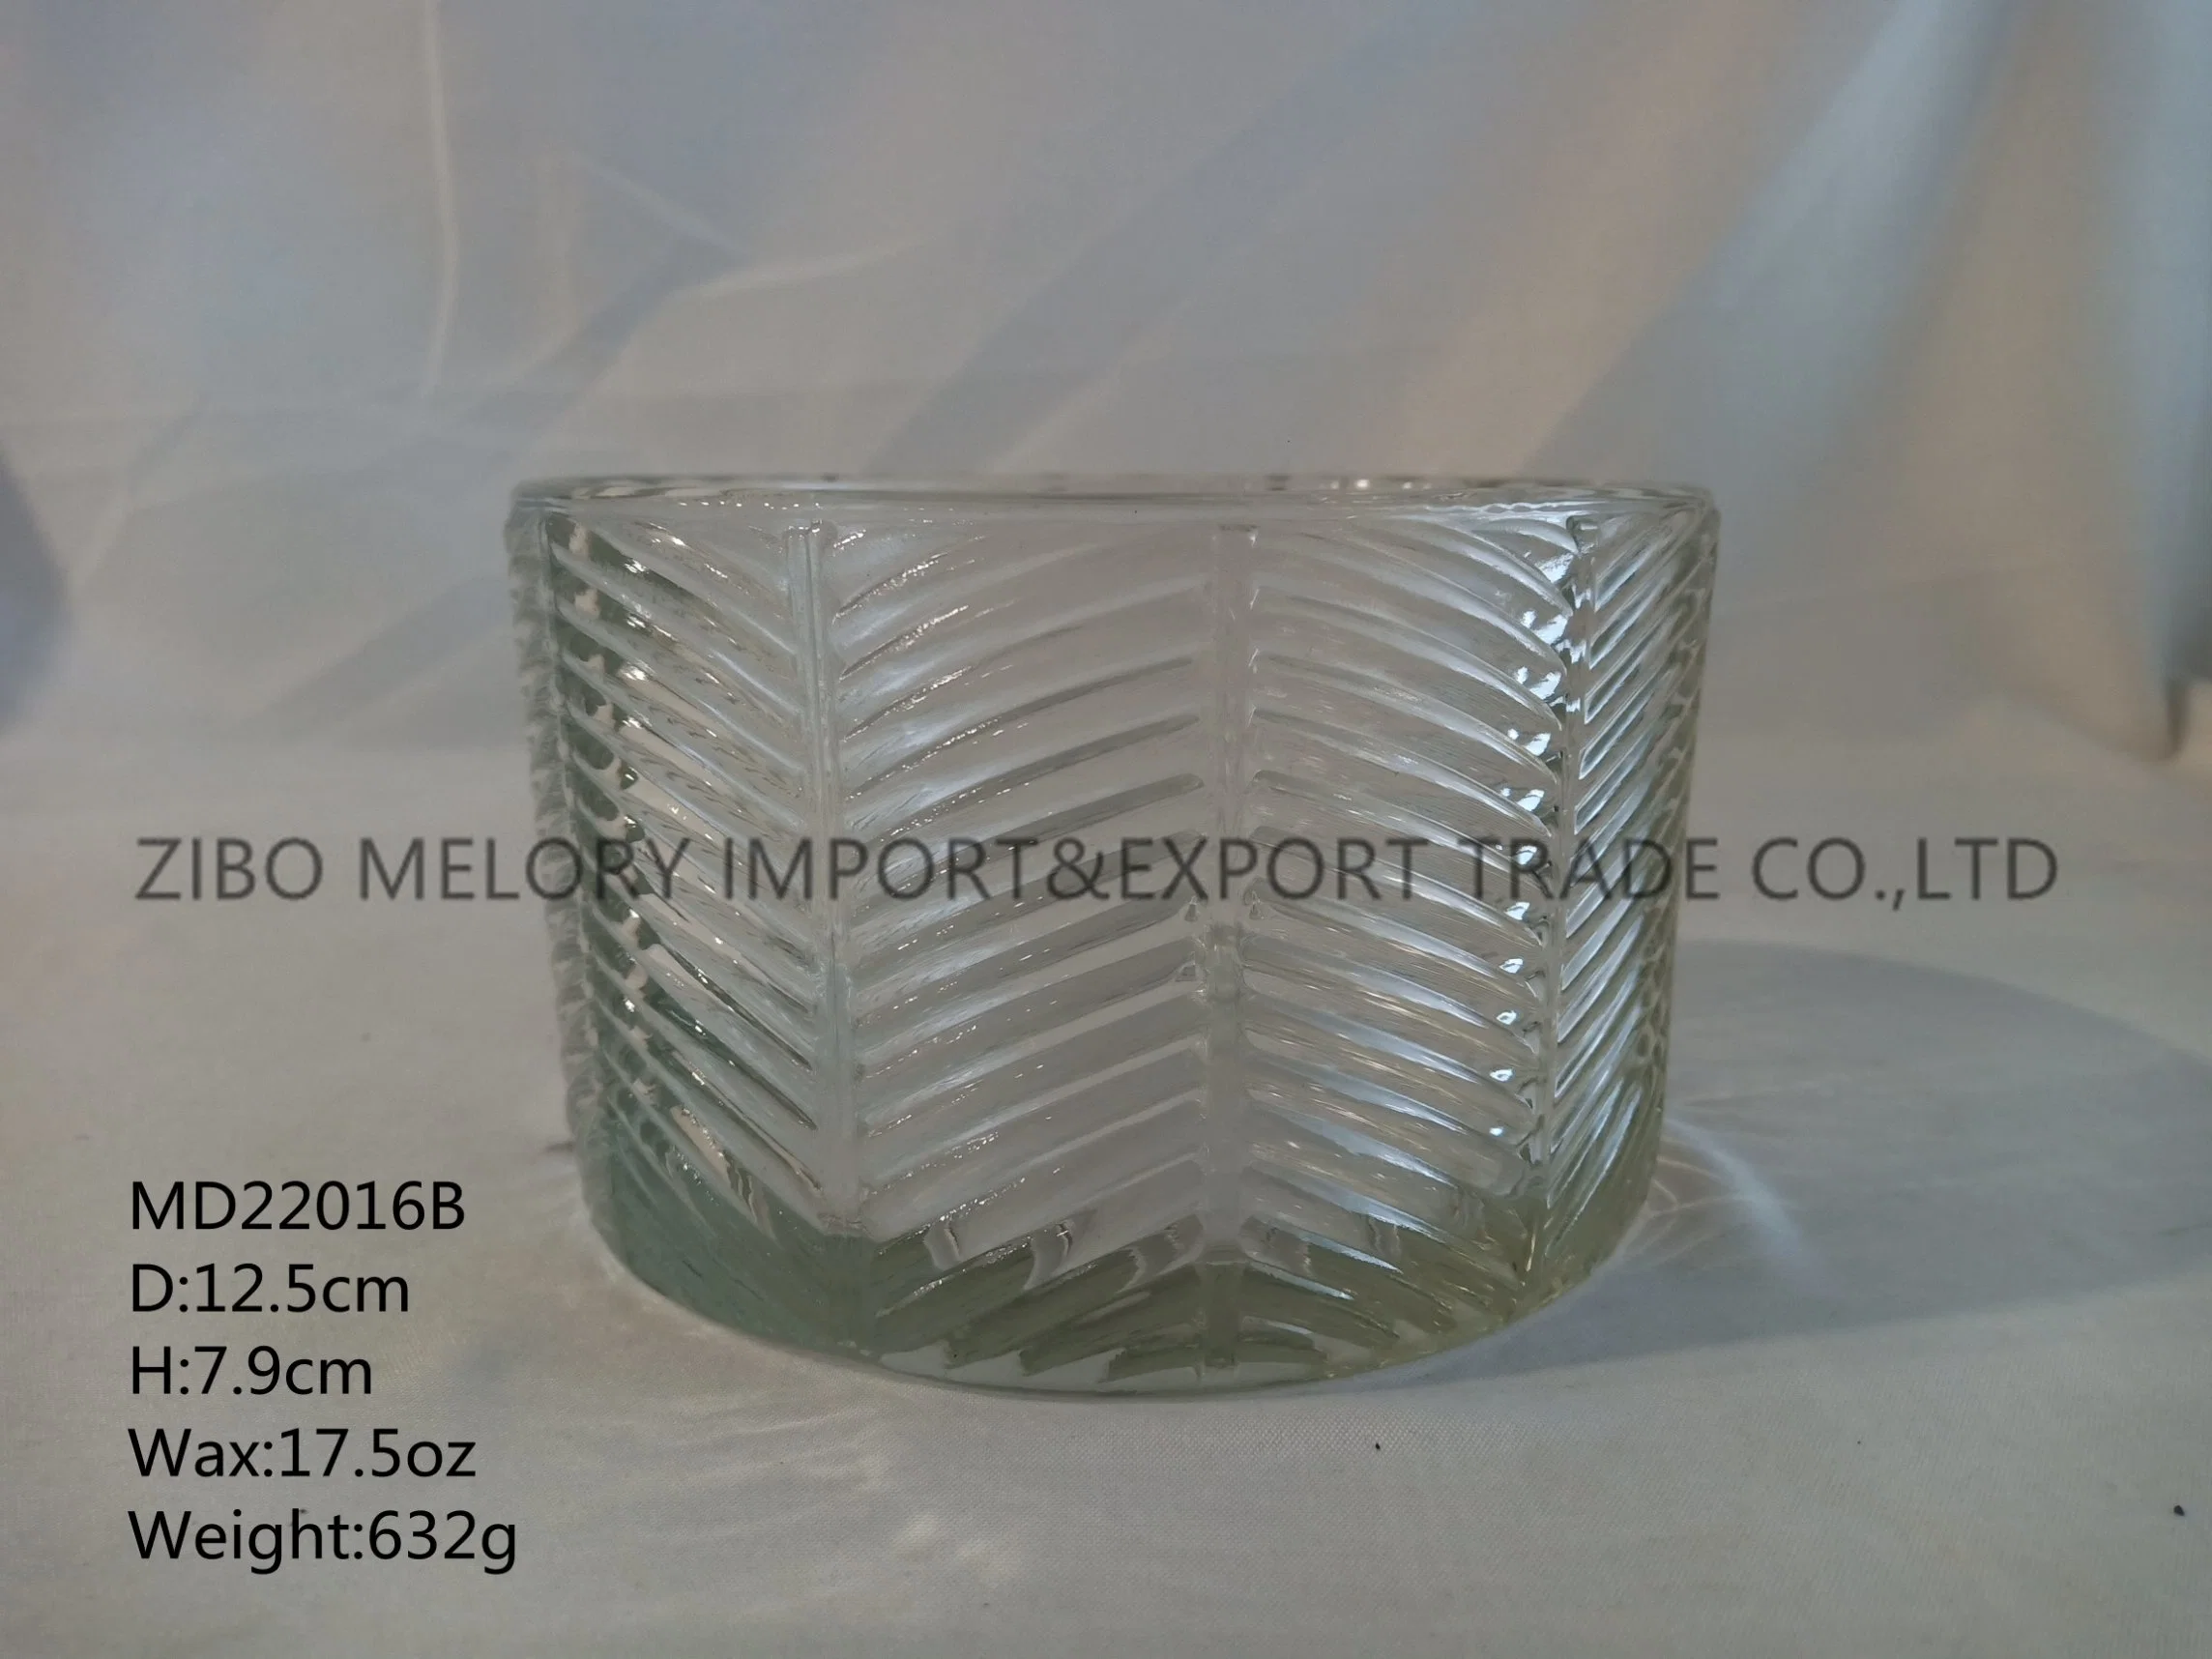 Bowl-Shaped Wax Cup/Glass Candle Holder with Leaf Vein Pattern